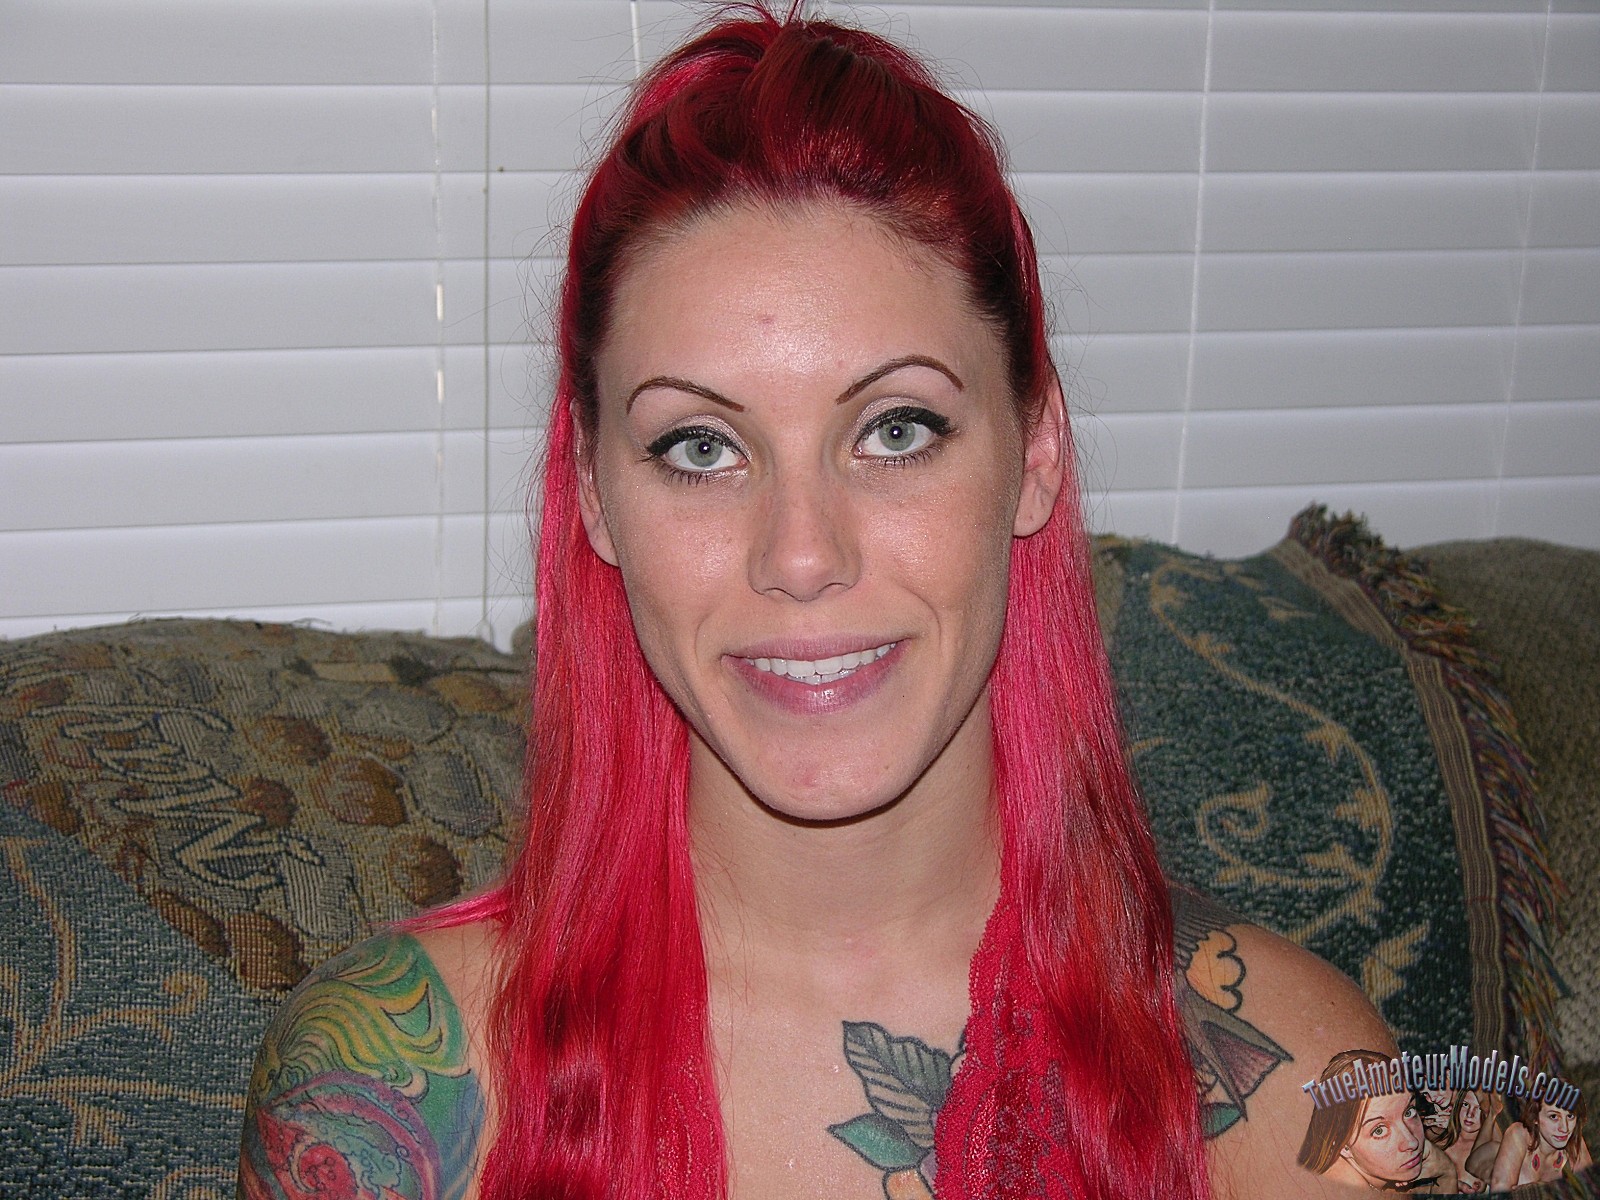 Tattooed Amateur With Red Hair Spreads Her Ass 40480 Hot Sex Picture pic